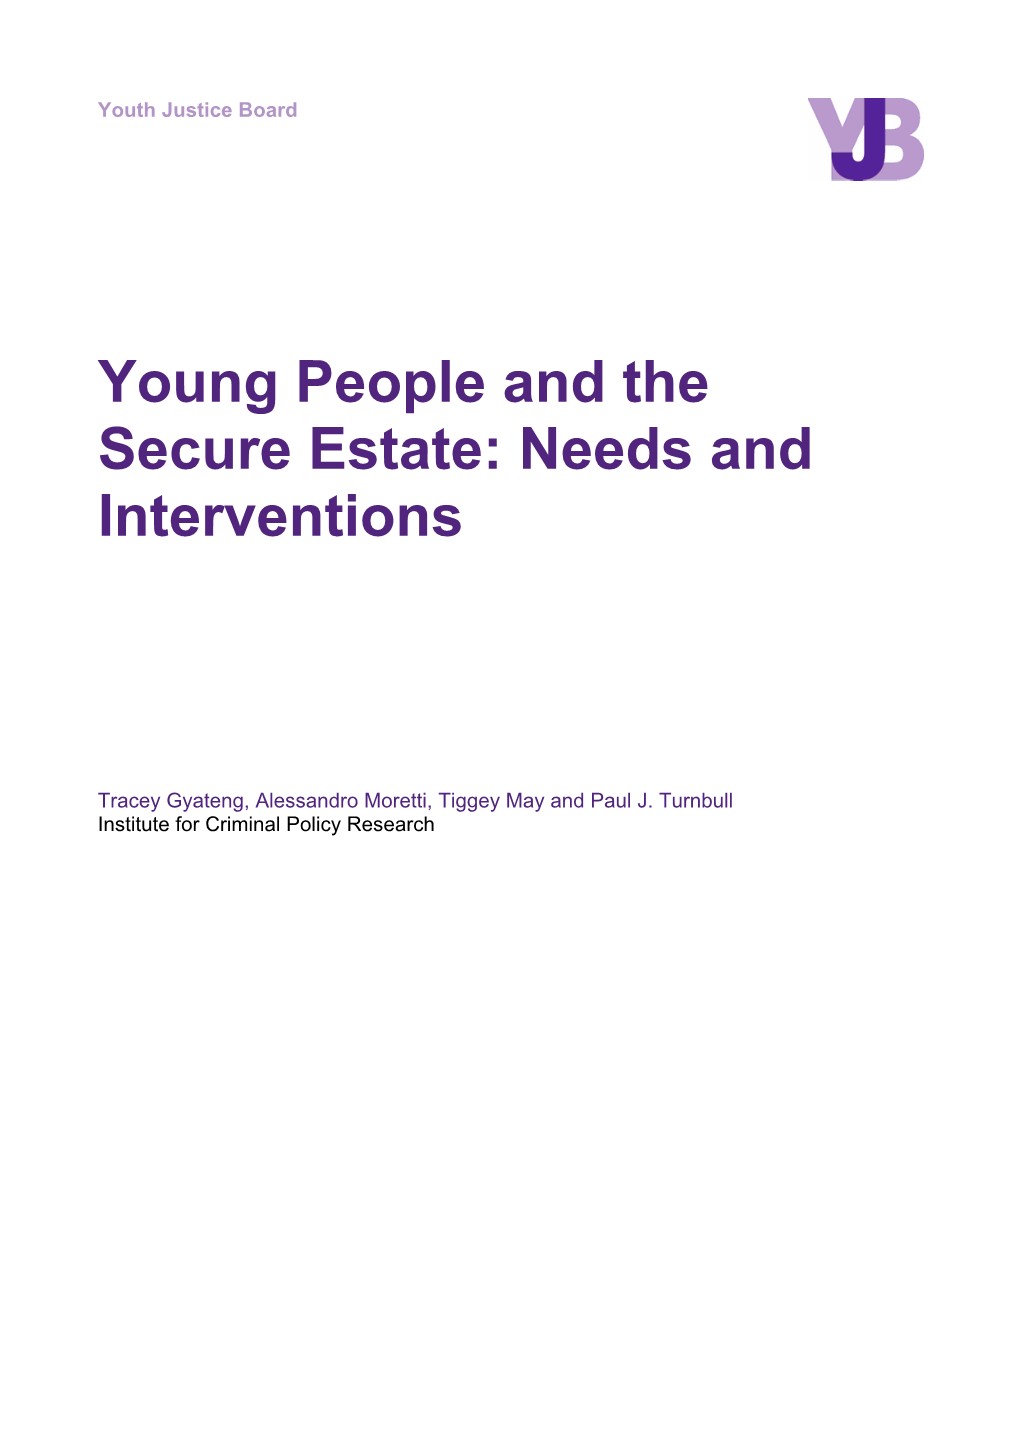 Young People and the Secure Estate: Needs and Interventions